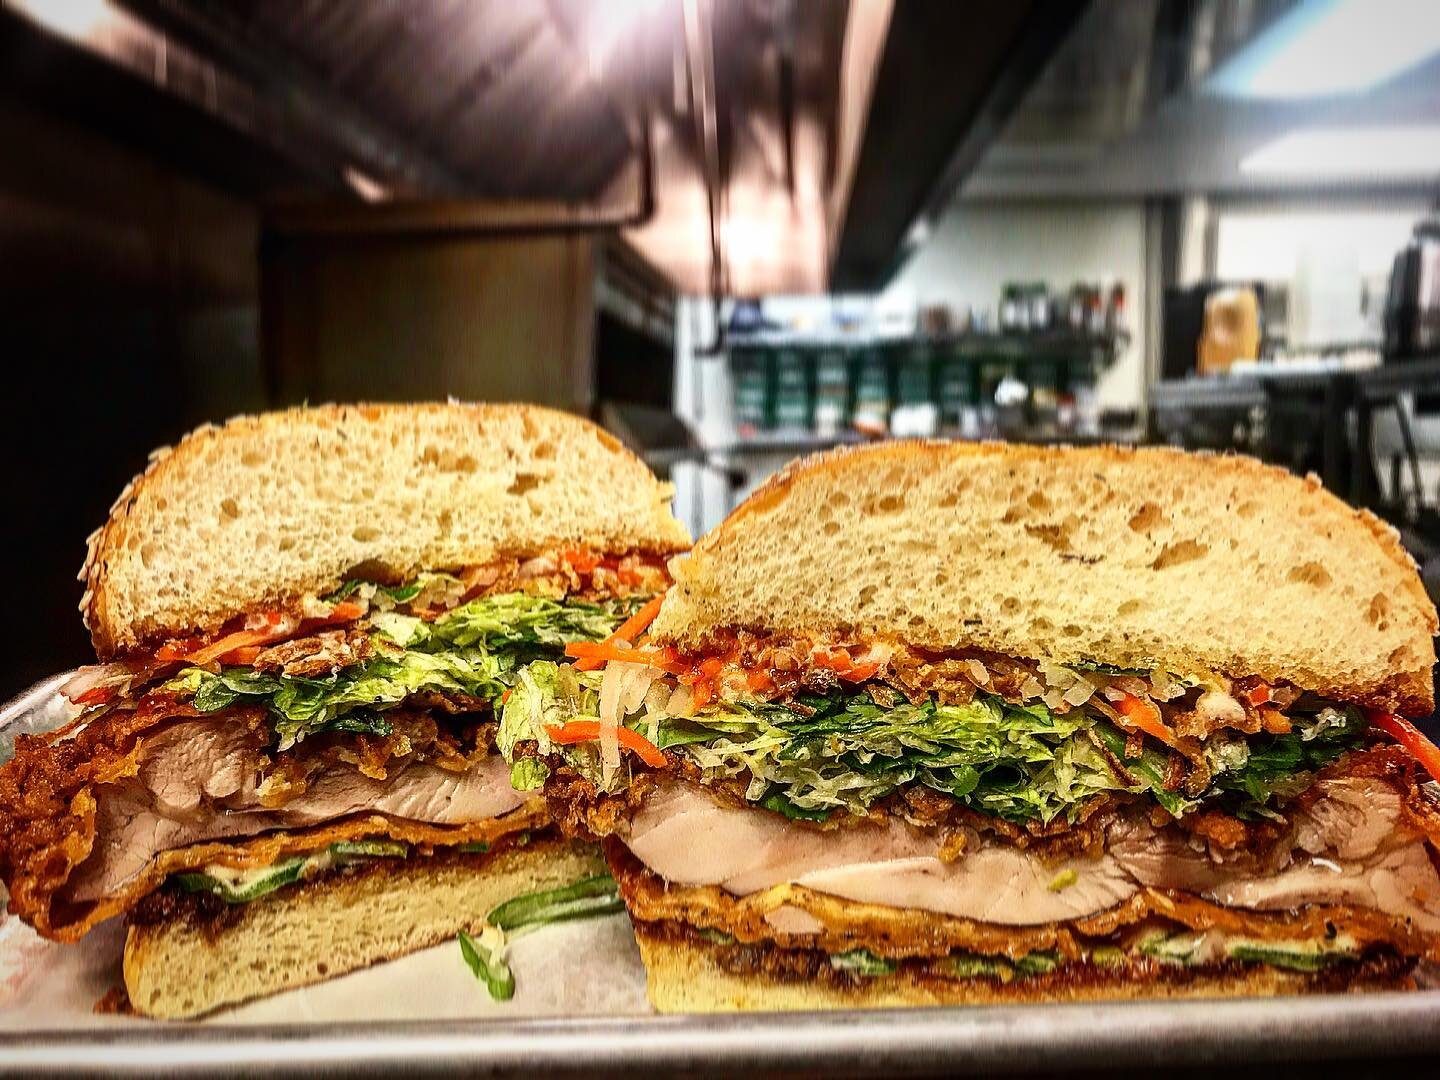 COMING SOON!! Our new Vietnamese style fried chicken sandwich. 48 hour brined chicken thigh, double fried and topped with house made garlic aioli, chili sauce, umami vinaigrette, herb salad, pickled vegetables, fresh jalape&ntilde;o all on a perfectl